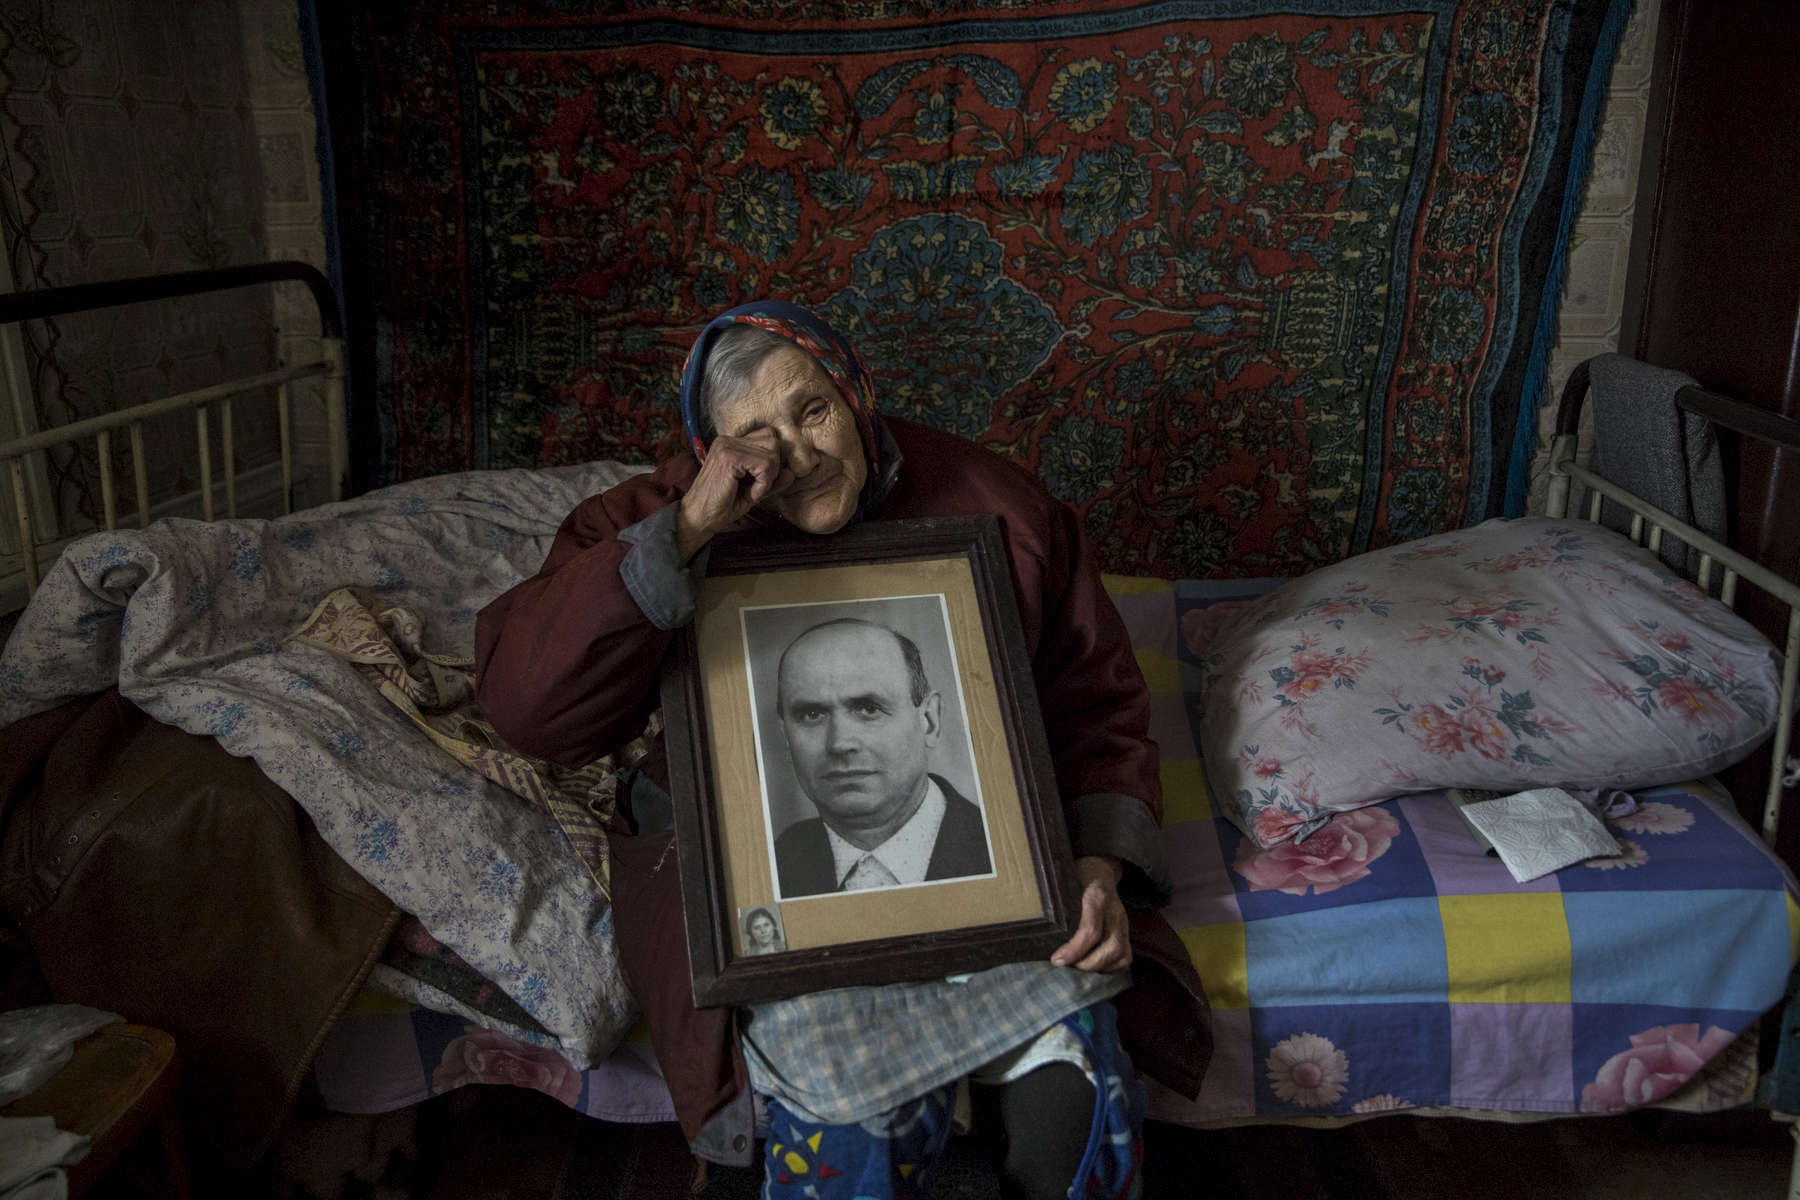  Katerinovka, Lugansk: Natalia Reshetnyakova, age 83 holds a portrait of her late husband who she was married to for over 50 years. She lives alone now. The only thing left reminding her of her husband is this portrait. The population of Natalia's village comprises less than 300 people. The village is exposed to the sniper’s fire as the contact line is just few kilometers away.